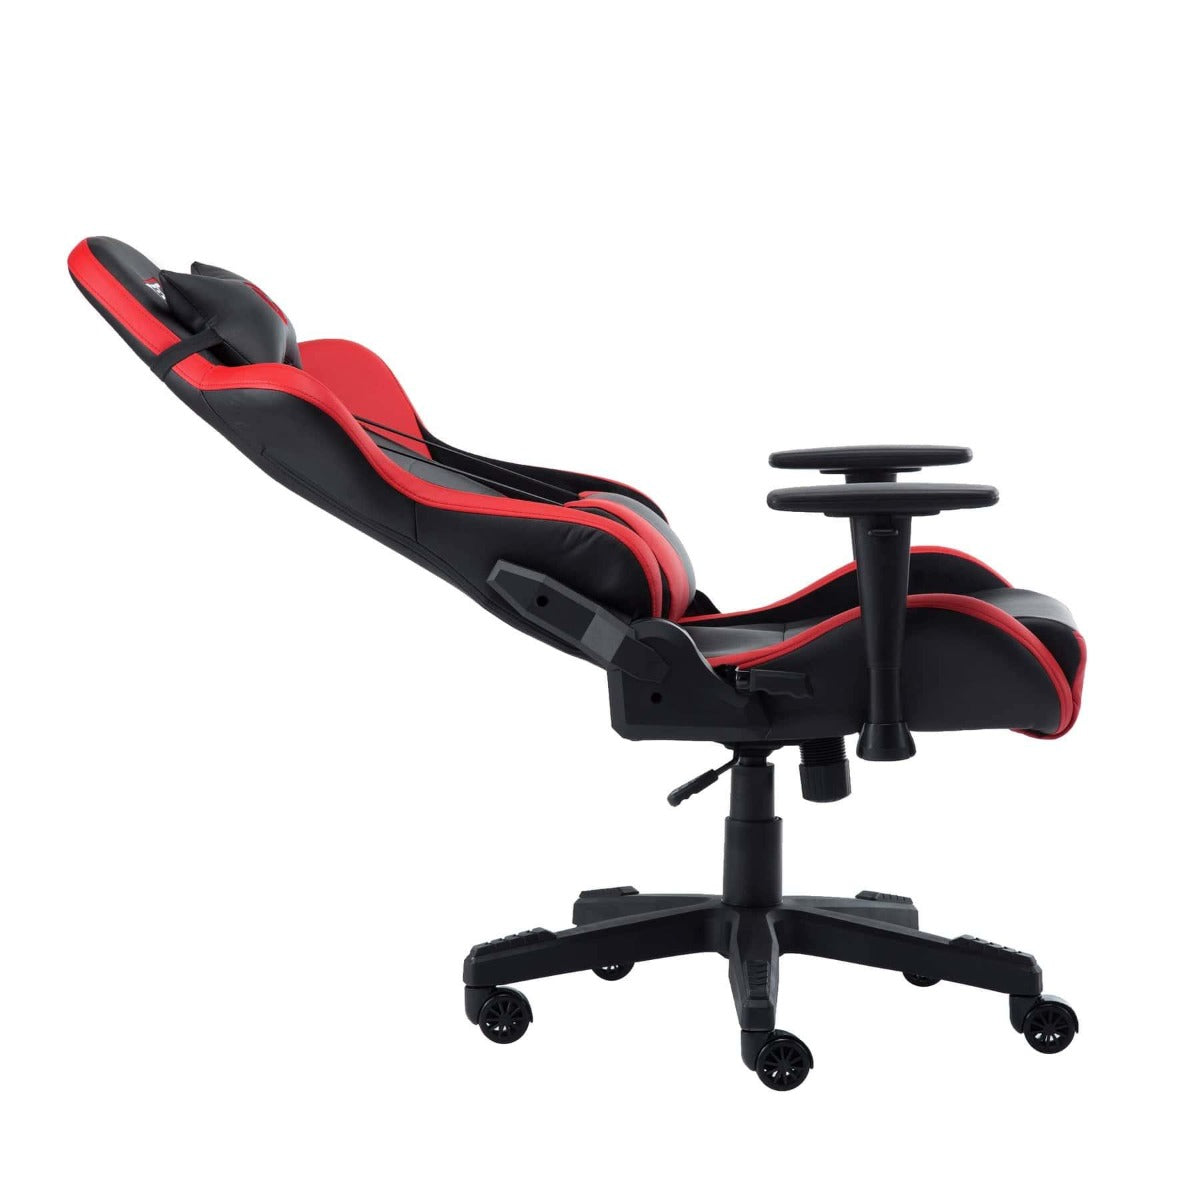 Techni Sport TS-90 Red Office-PC Gaming Chair RTA-TS90-RED Reclined